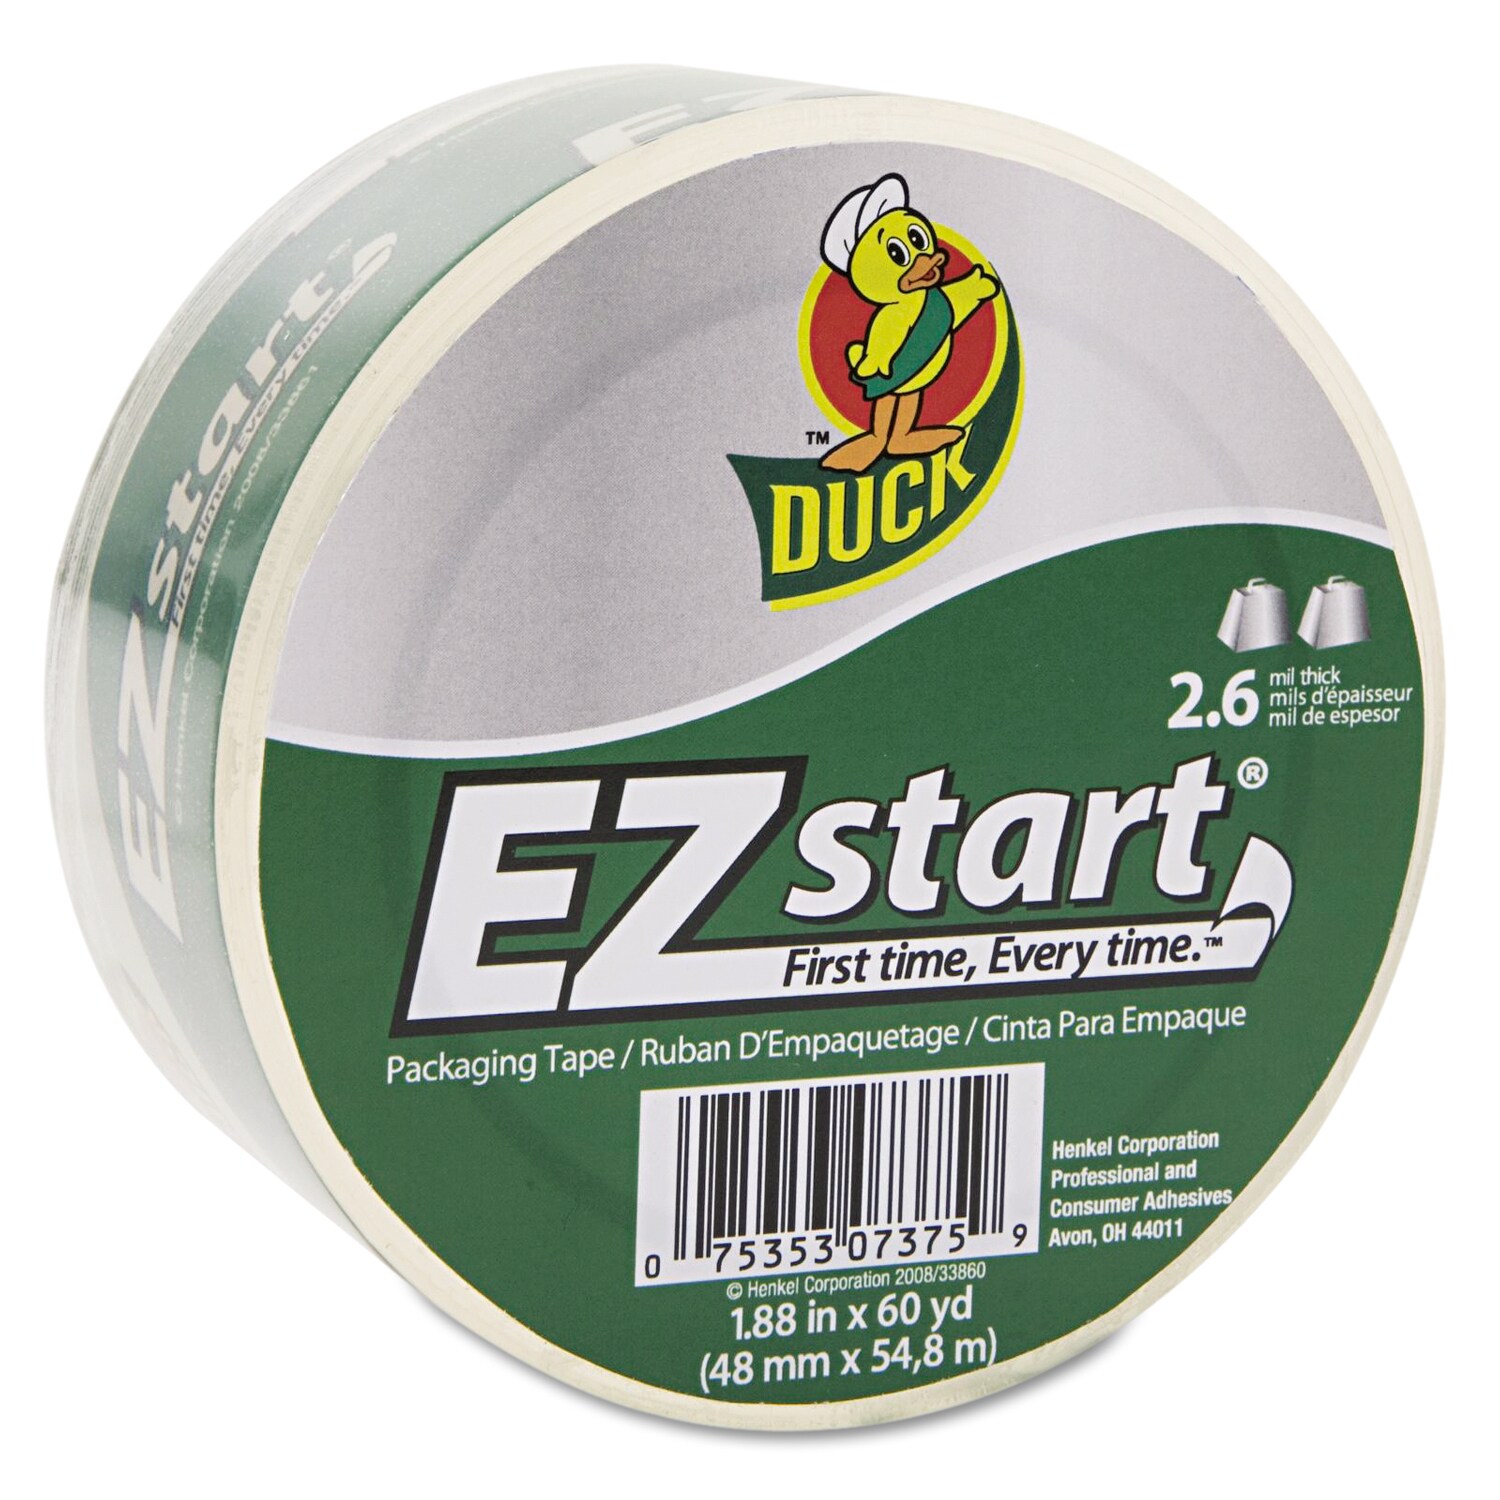 1 ROLL CLEAR Duck Ez Start Packing Duct Tape With Dispenser 1.88 x 50 yd 